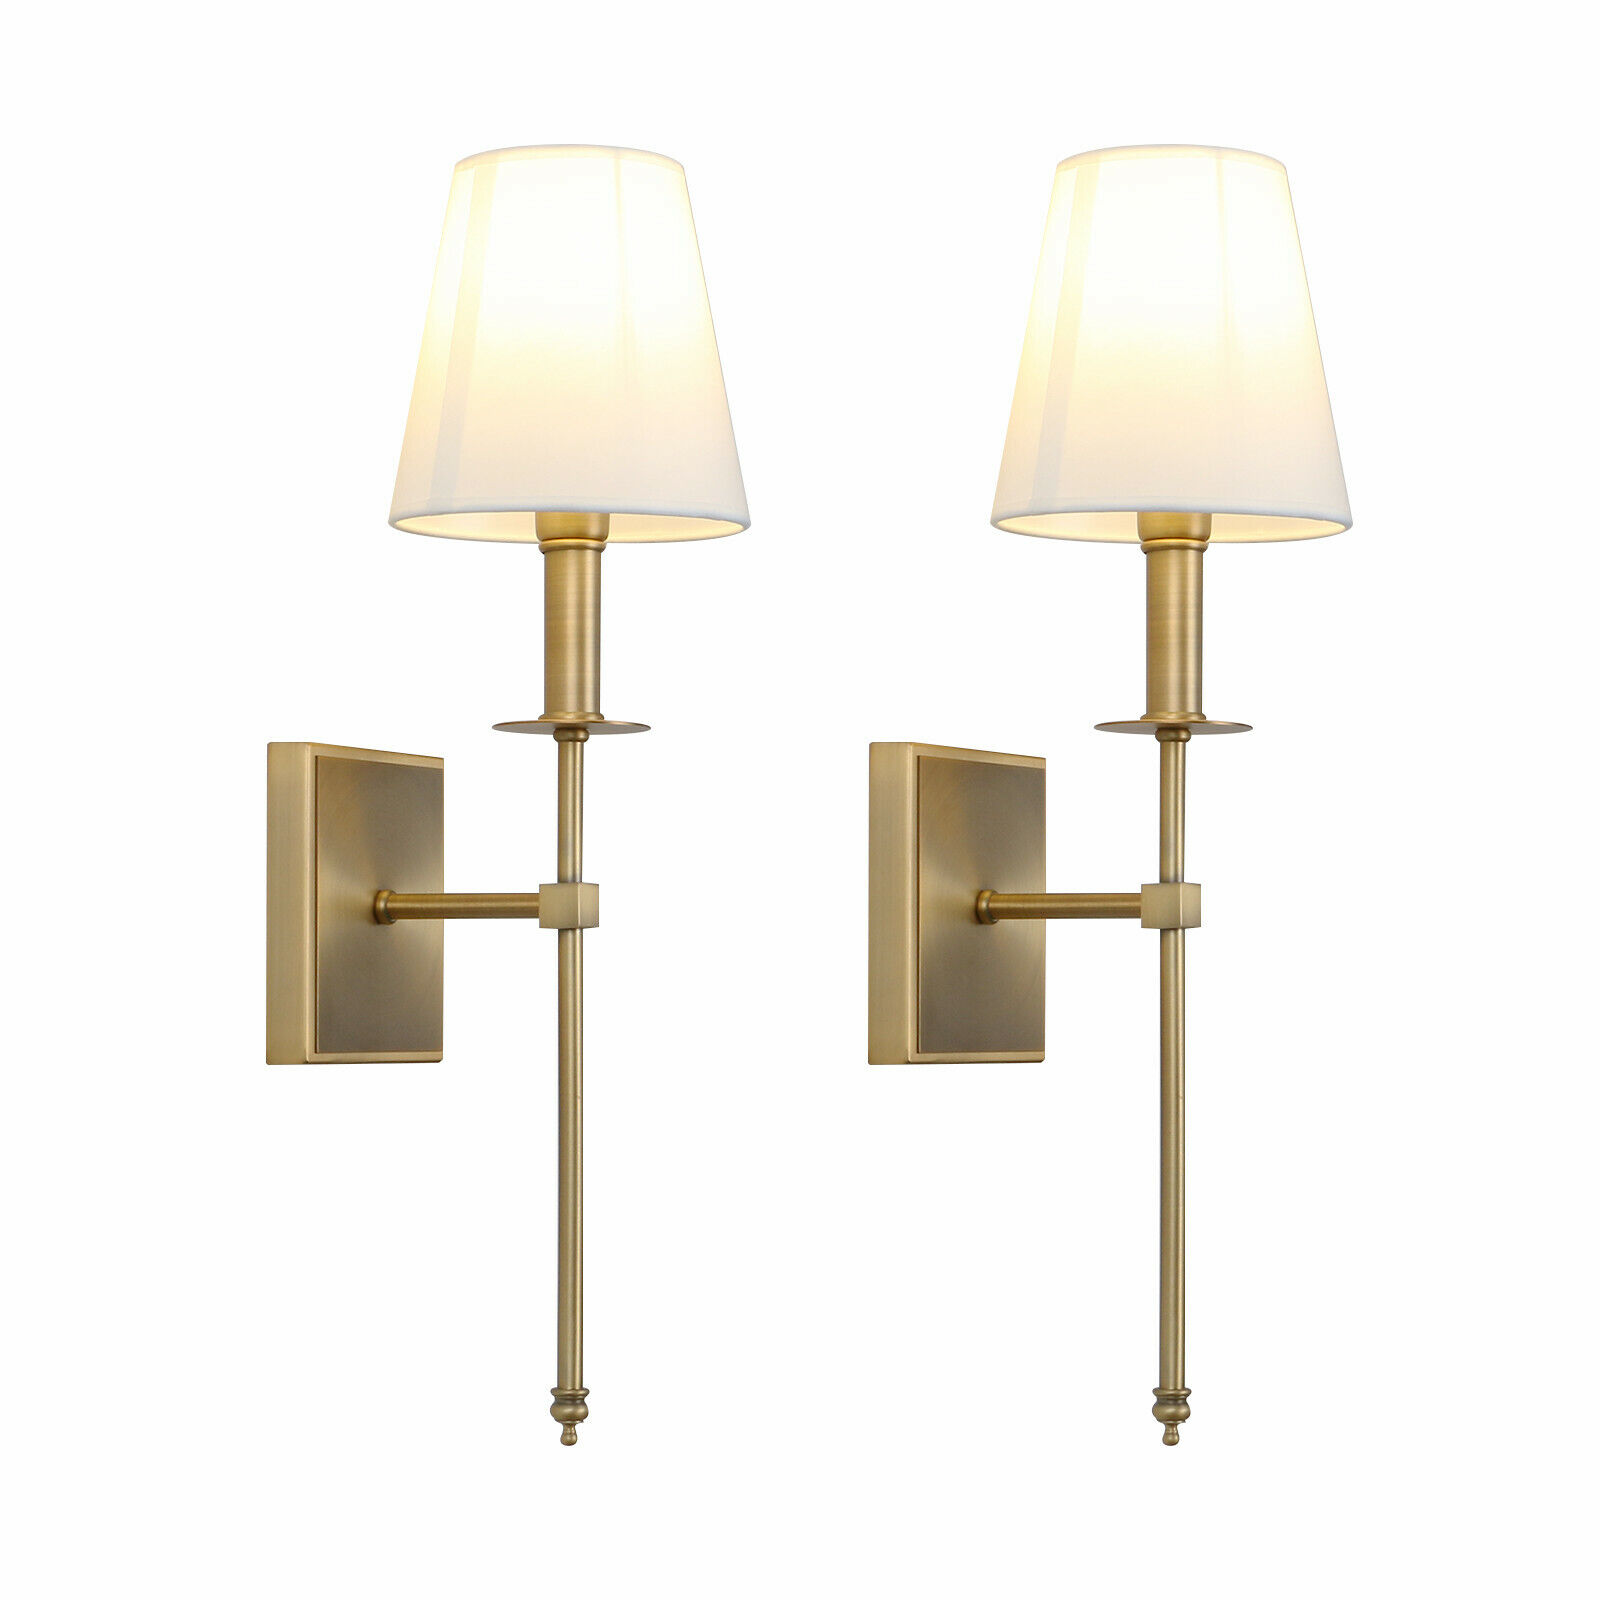 Pair Modern Industrial Edison Bedside Antique Wall Light Sconce Cloth Shade